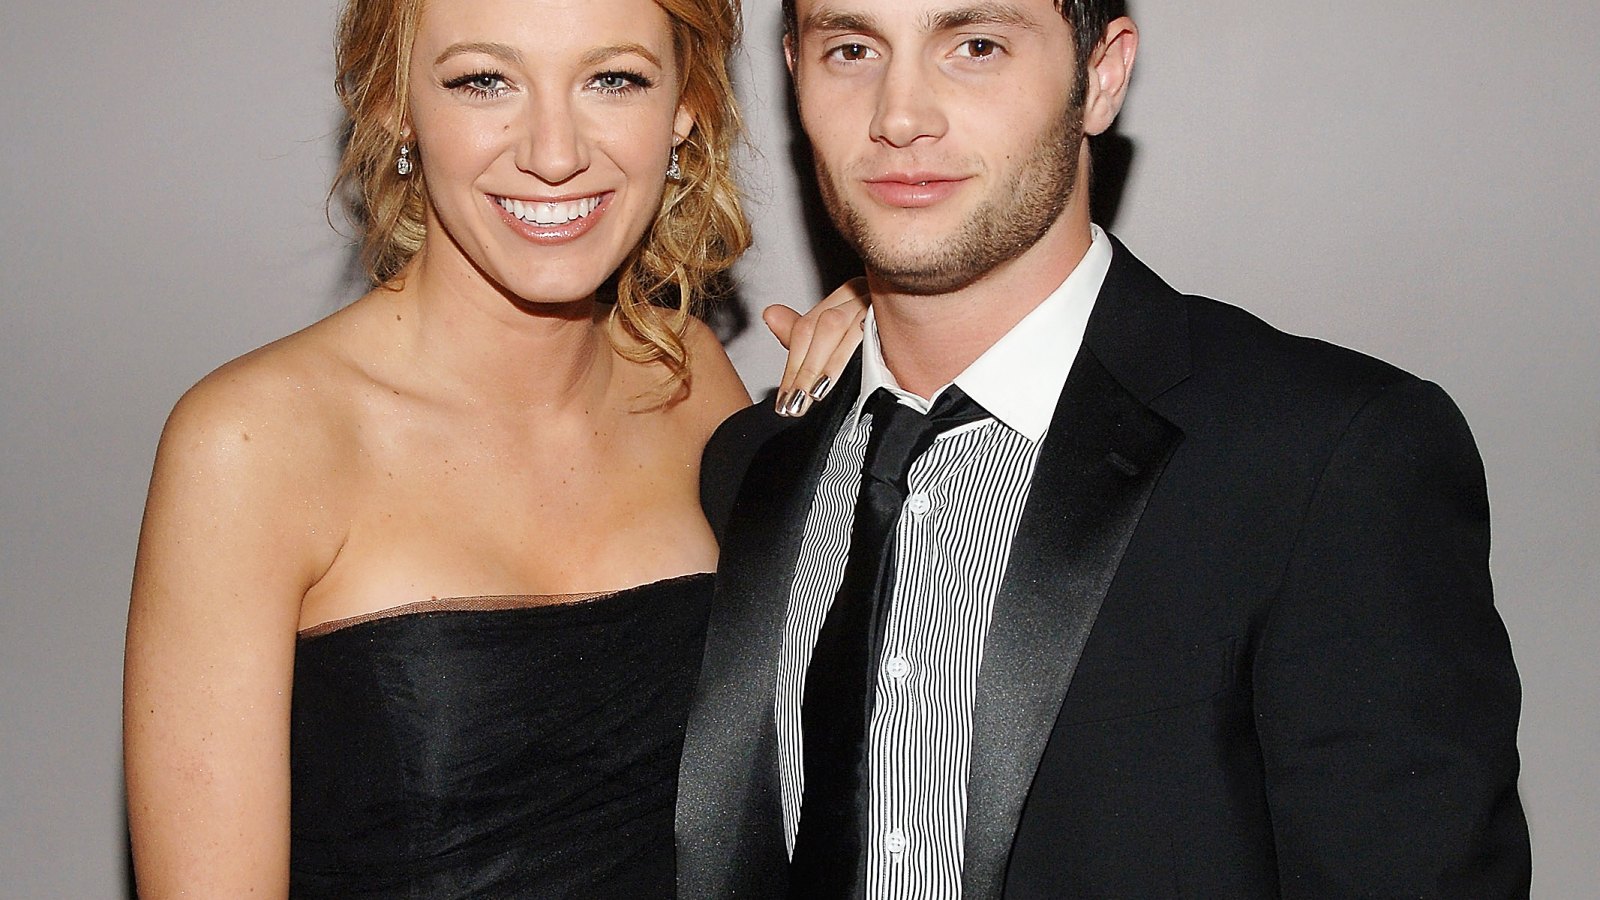 Penn Badgley Says Blake Lively Was His Best On Screen Kiss And Worst